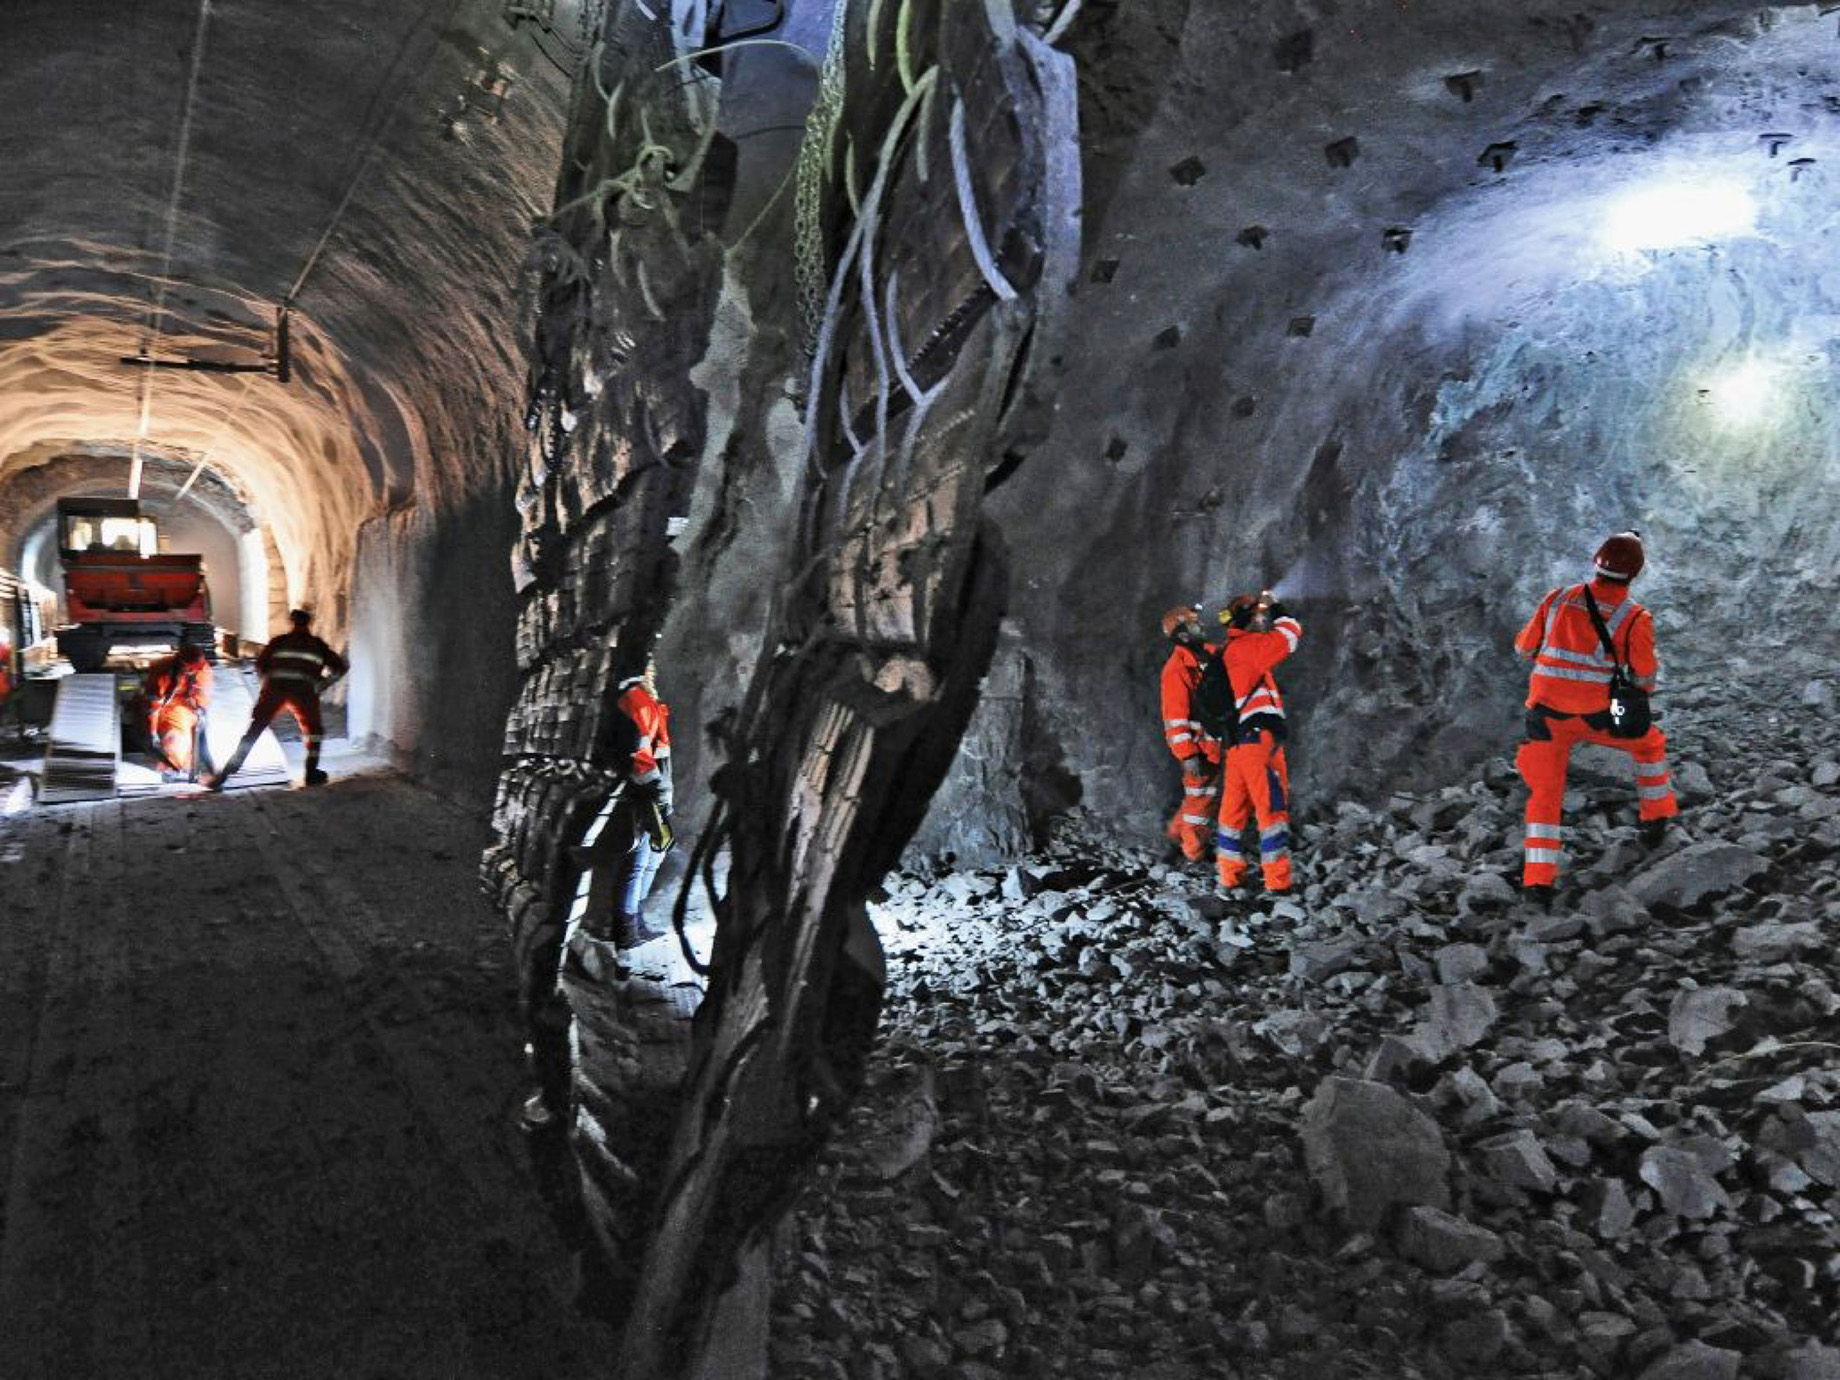 Photo: tunnel construction site with construction machinery and workers in protective clothing